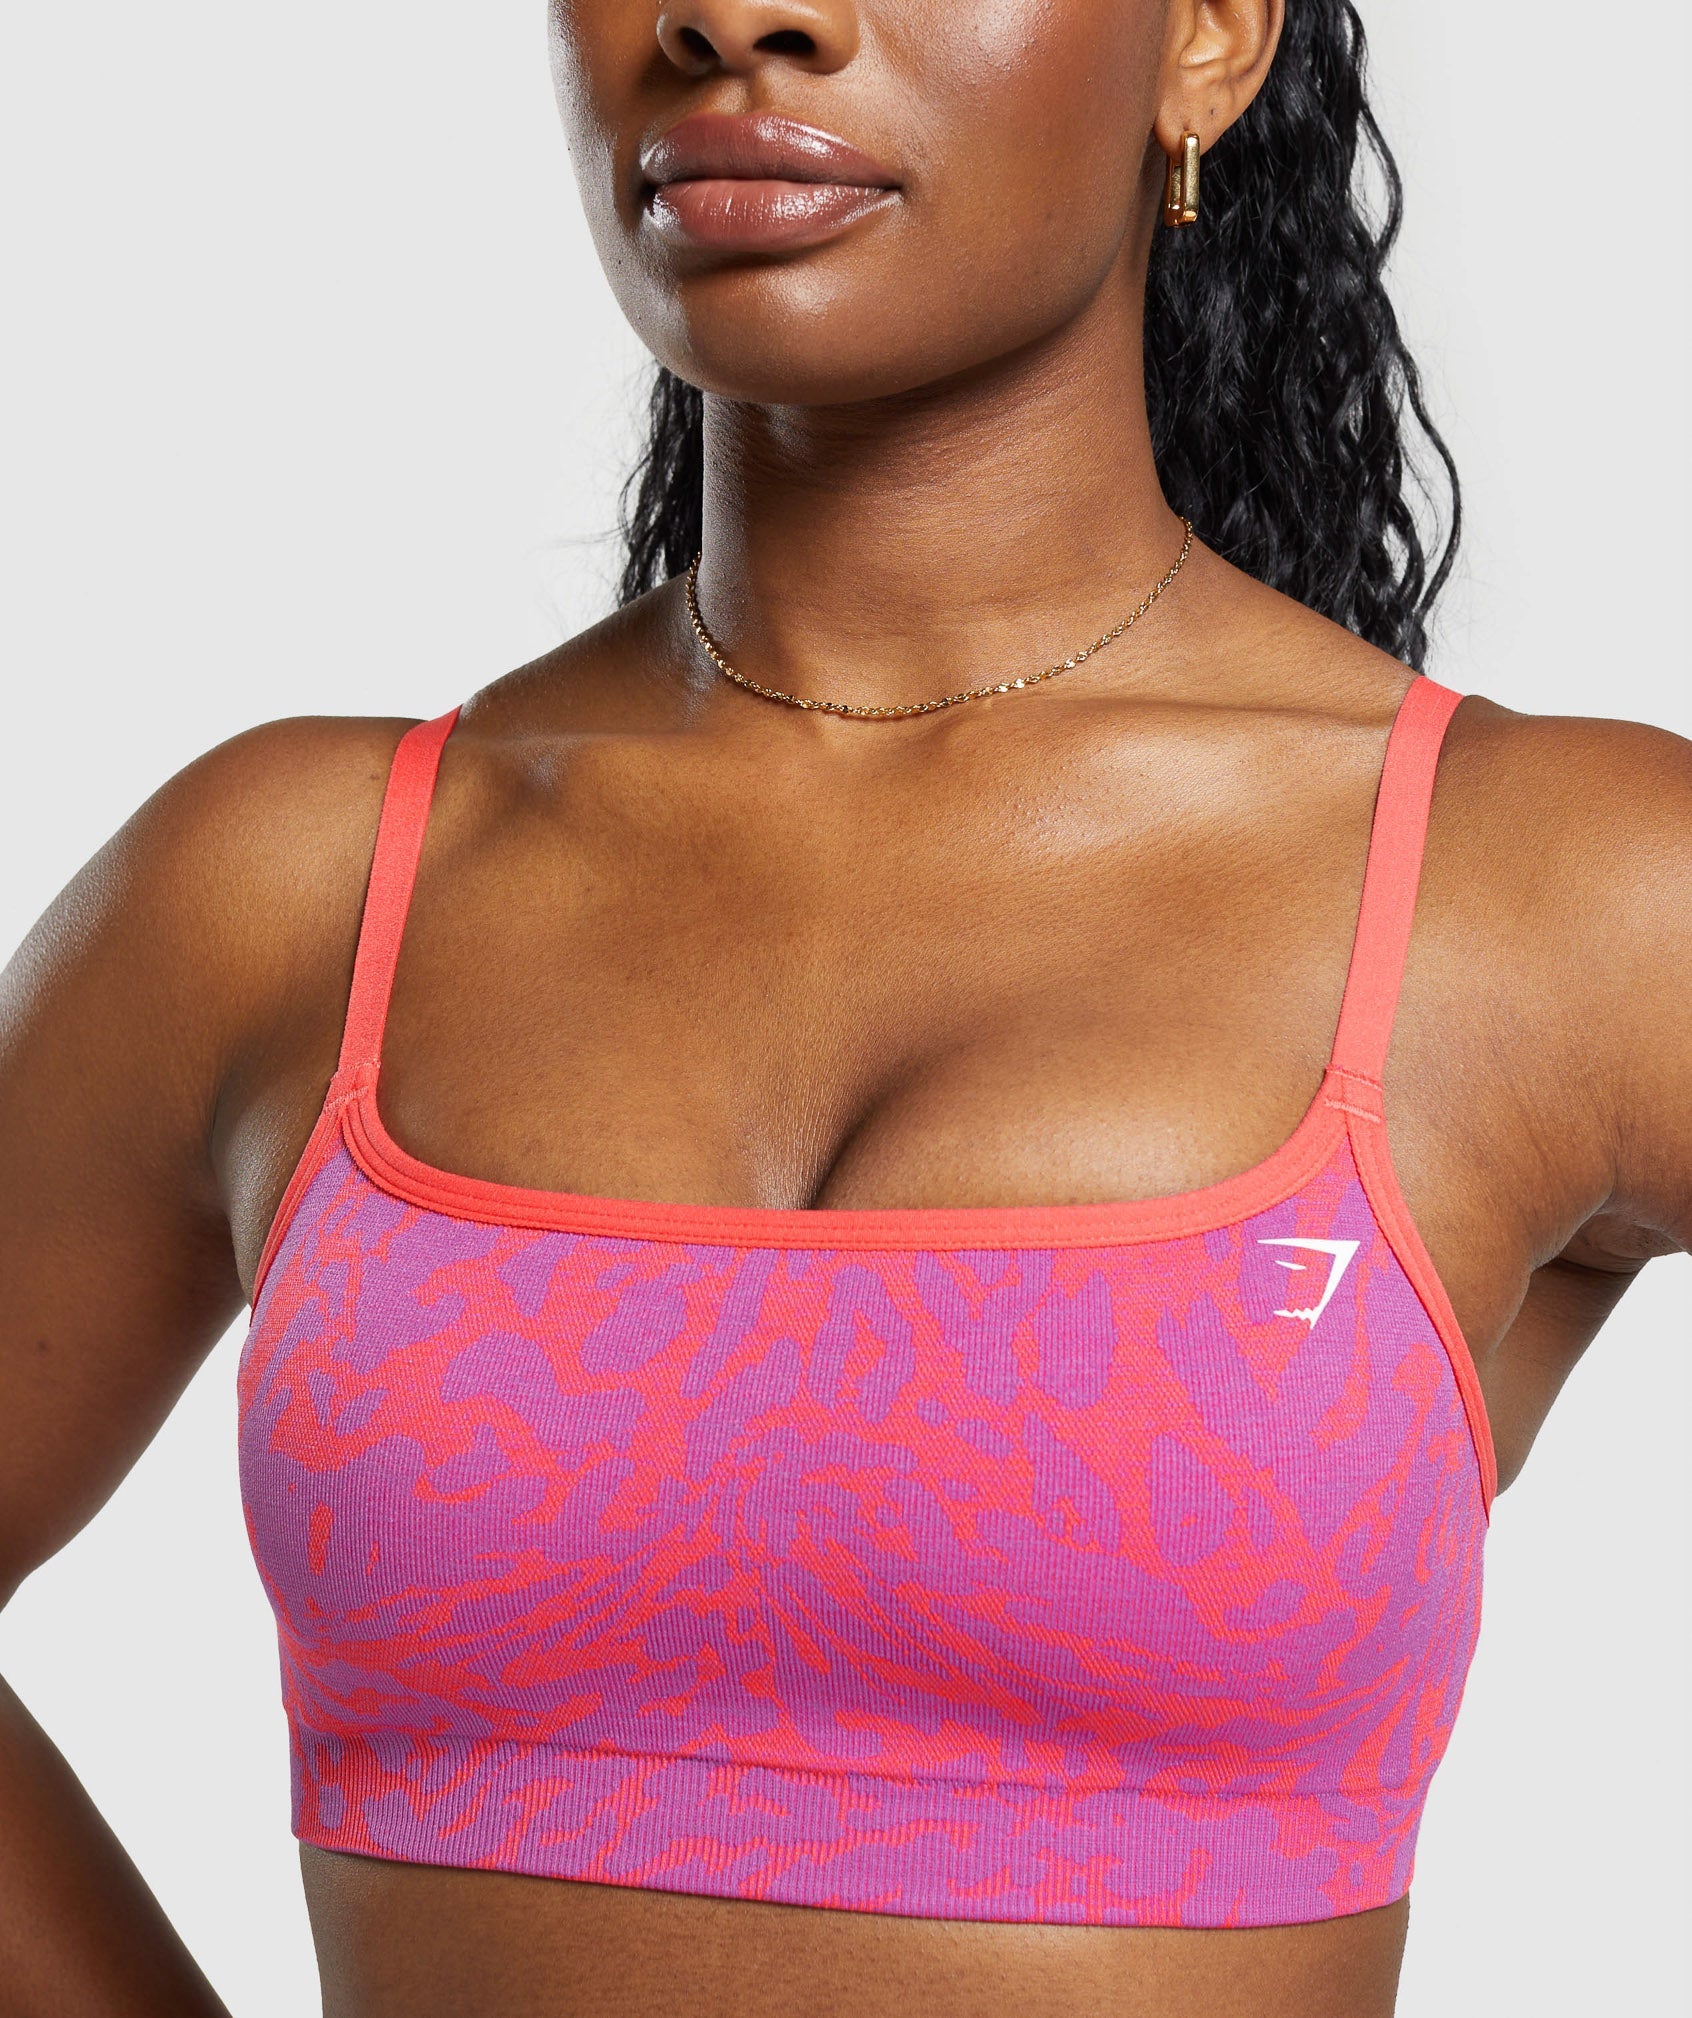 Adapt Safari Seamless Sports Bra in Shelly Pink/Fly Coral - view 5